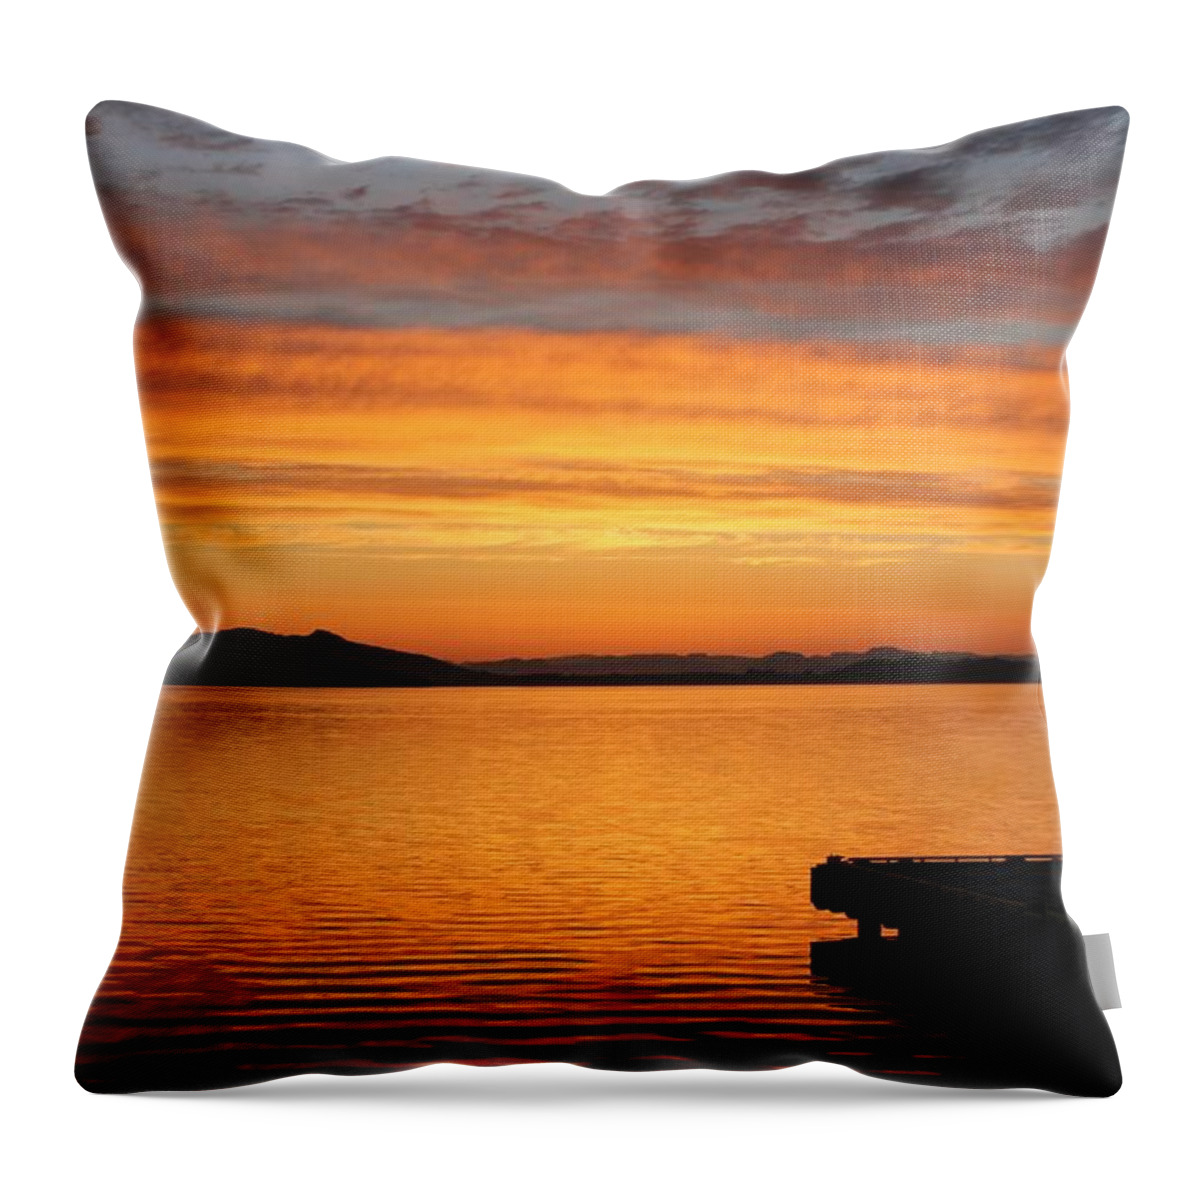 Dawn Throw Pillow featuring the photograph Dawn in the Sky at Dusavik by Charles and Melisa Morrison